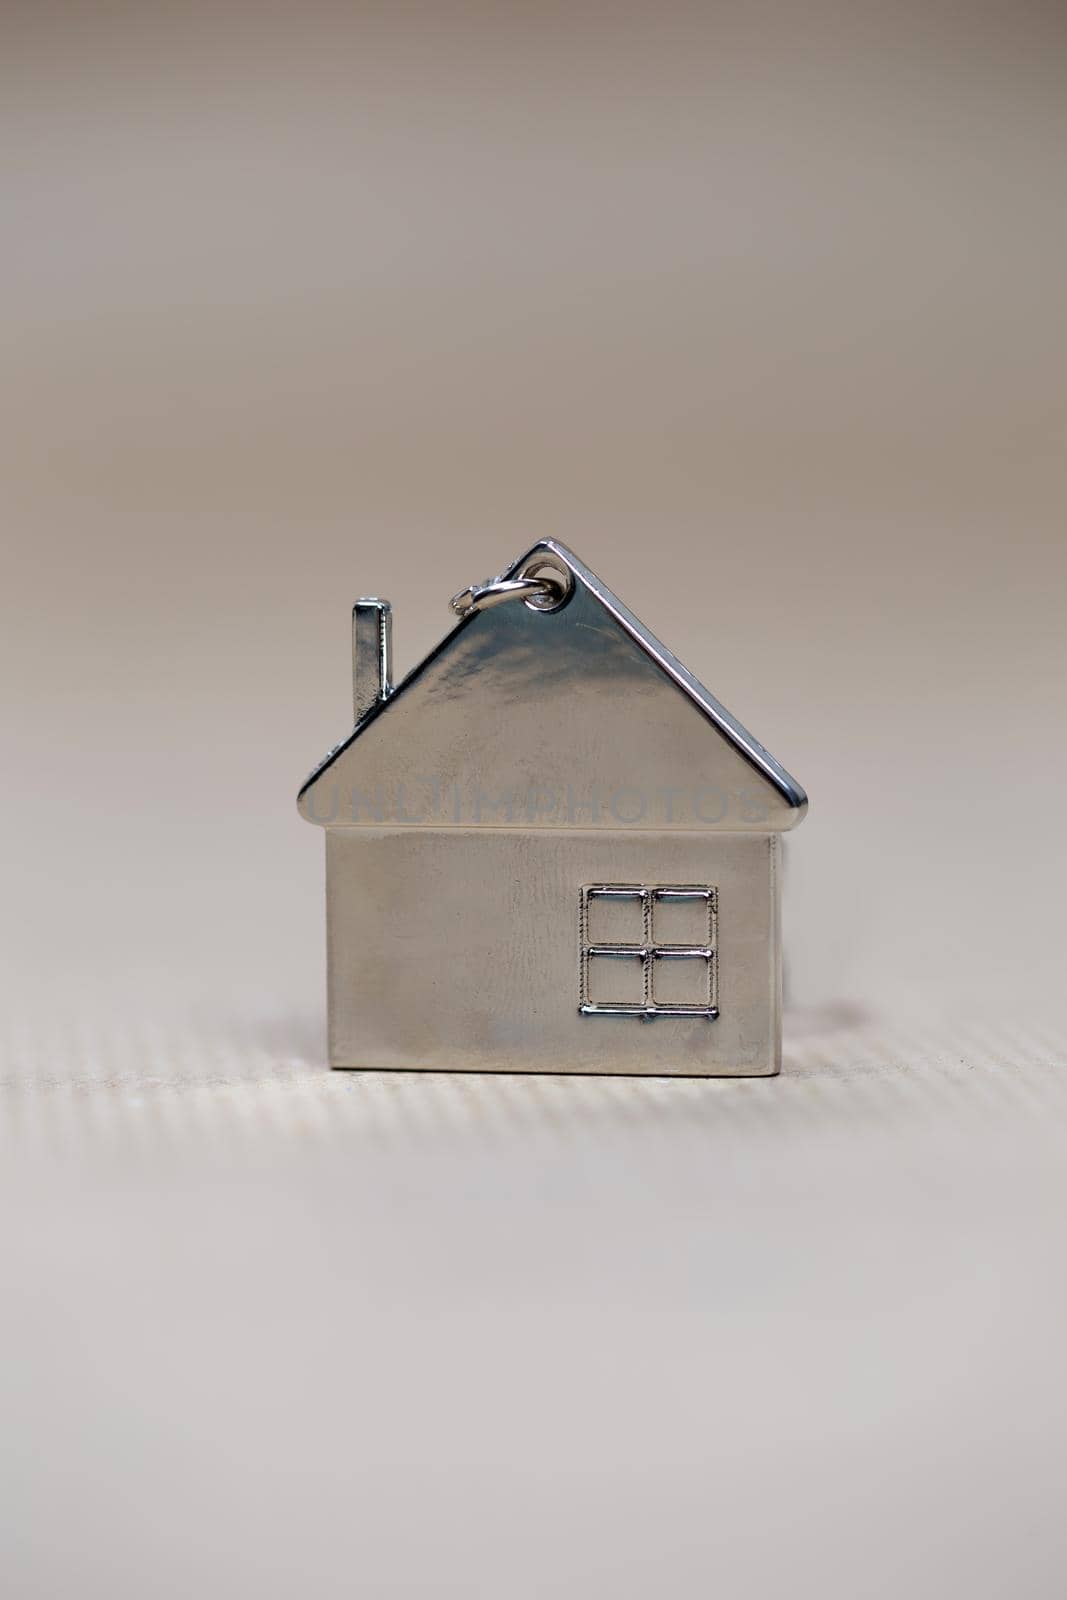 Little miniature house on blurred background, New home, Real Estate, Mortgage loan,architectural concept with Copy space space fot text